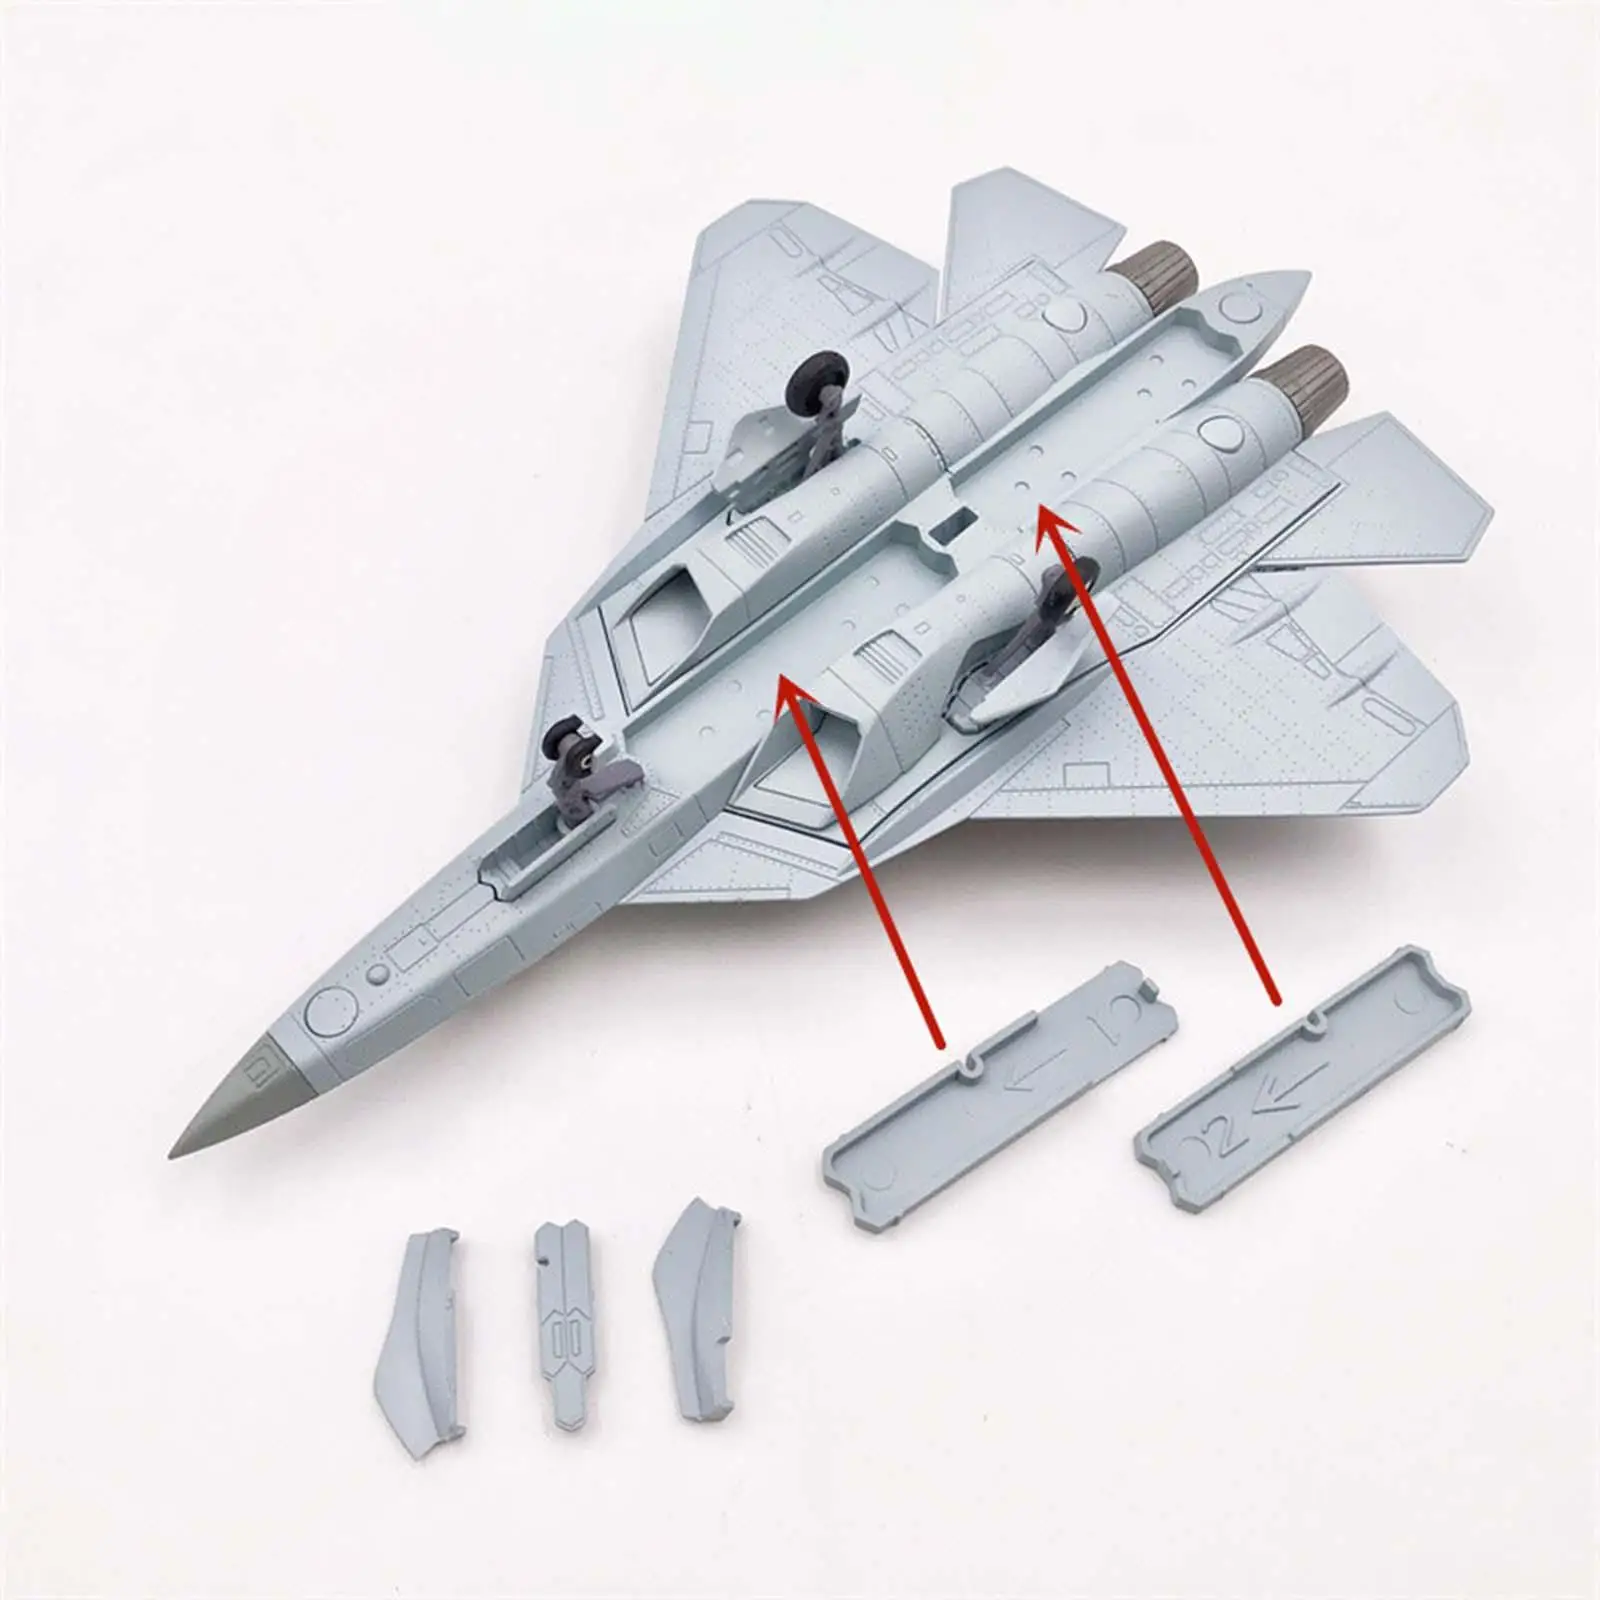 Russian Air Force Fighter Diecast Airplane Alloy Aircraft for Collection